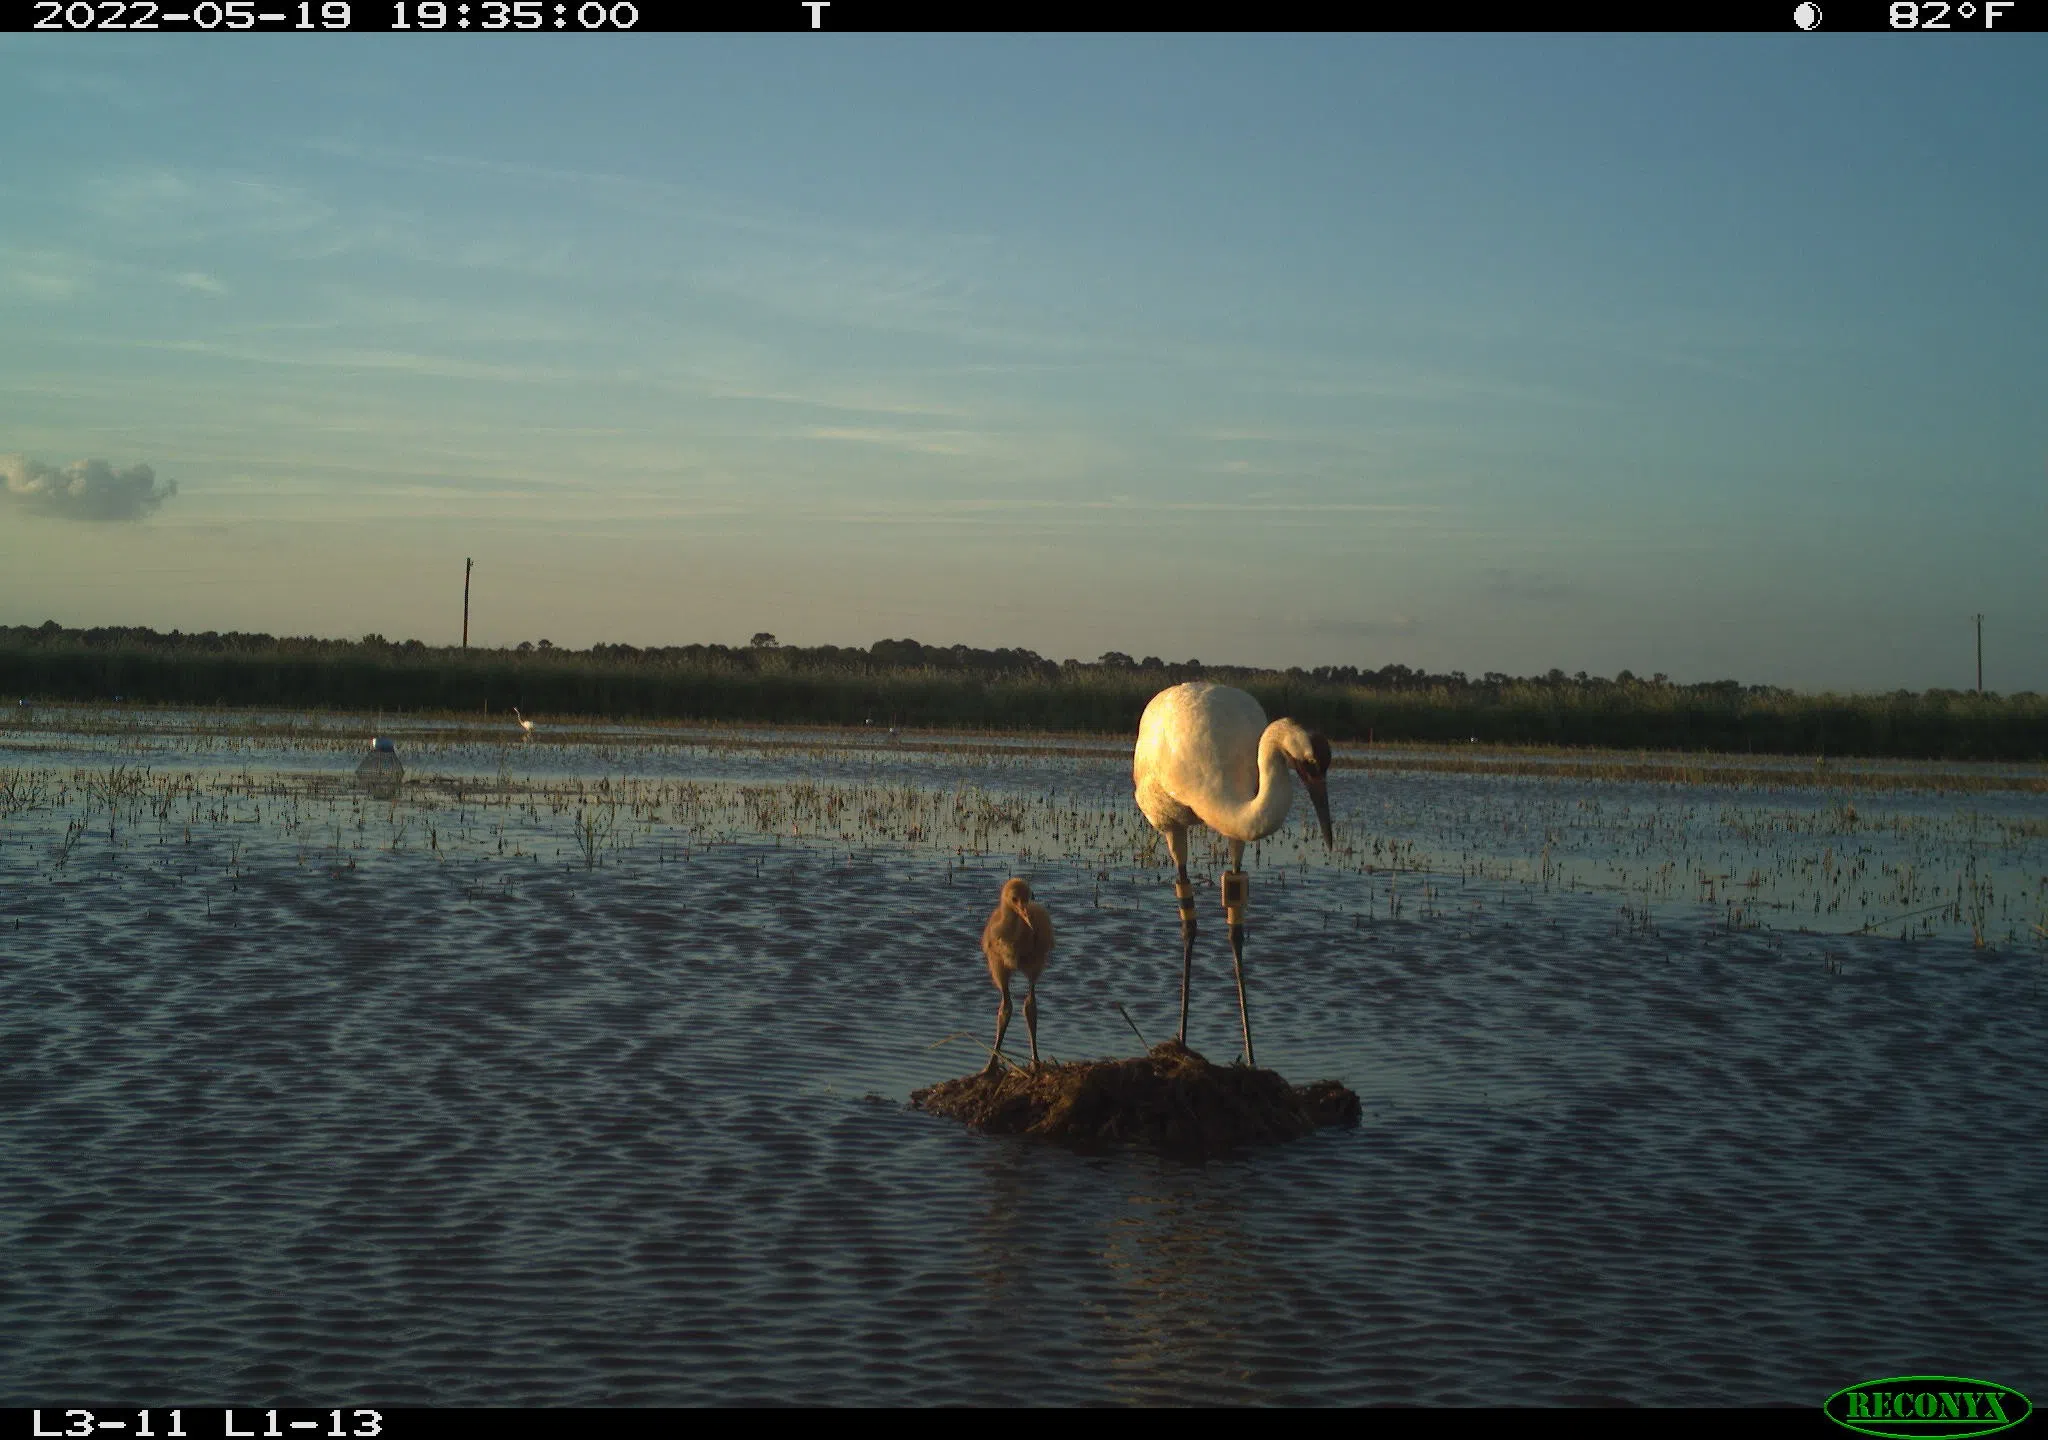 Louisiana's whooping crane population adds record eight wild hatched chicks during 2022 nesting season